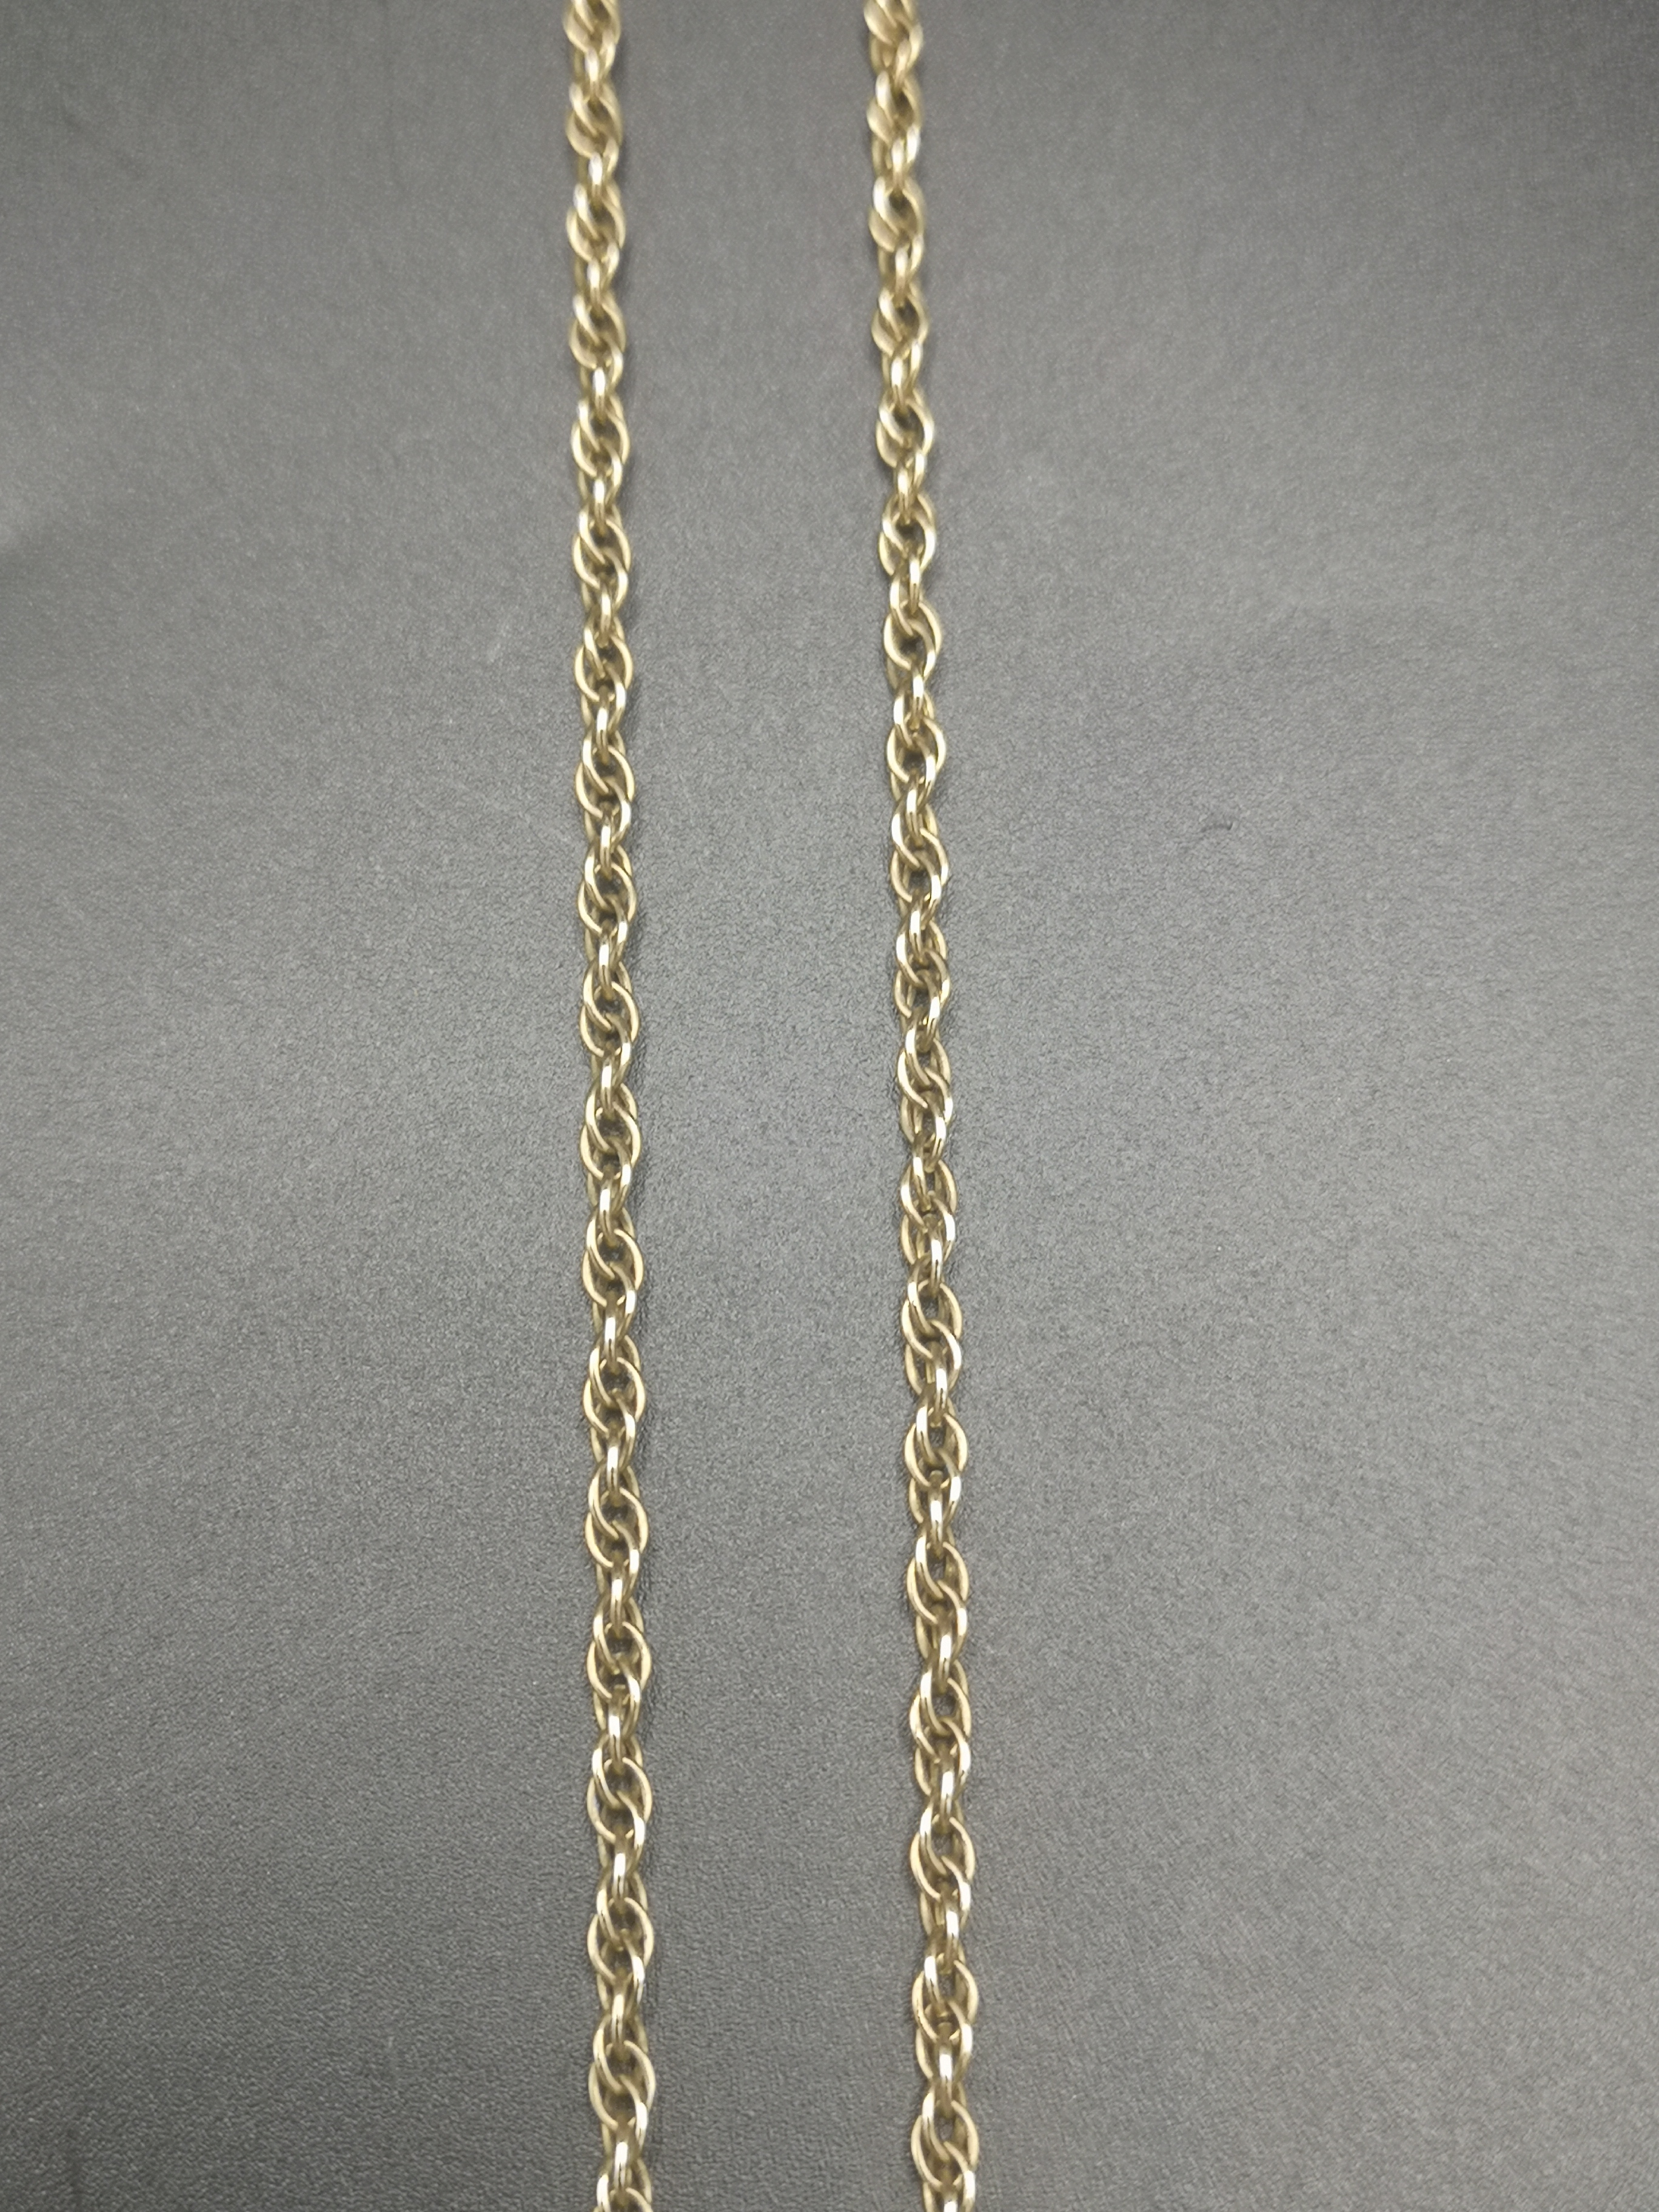 9ct gold necklace - Image 3 of 6